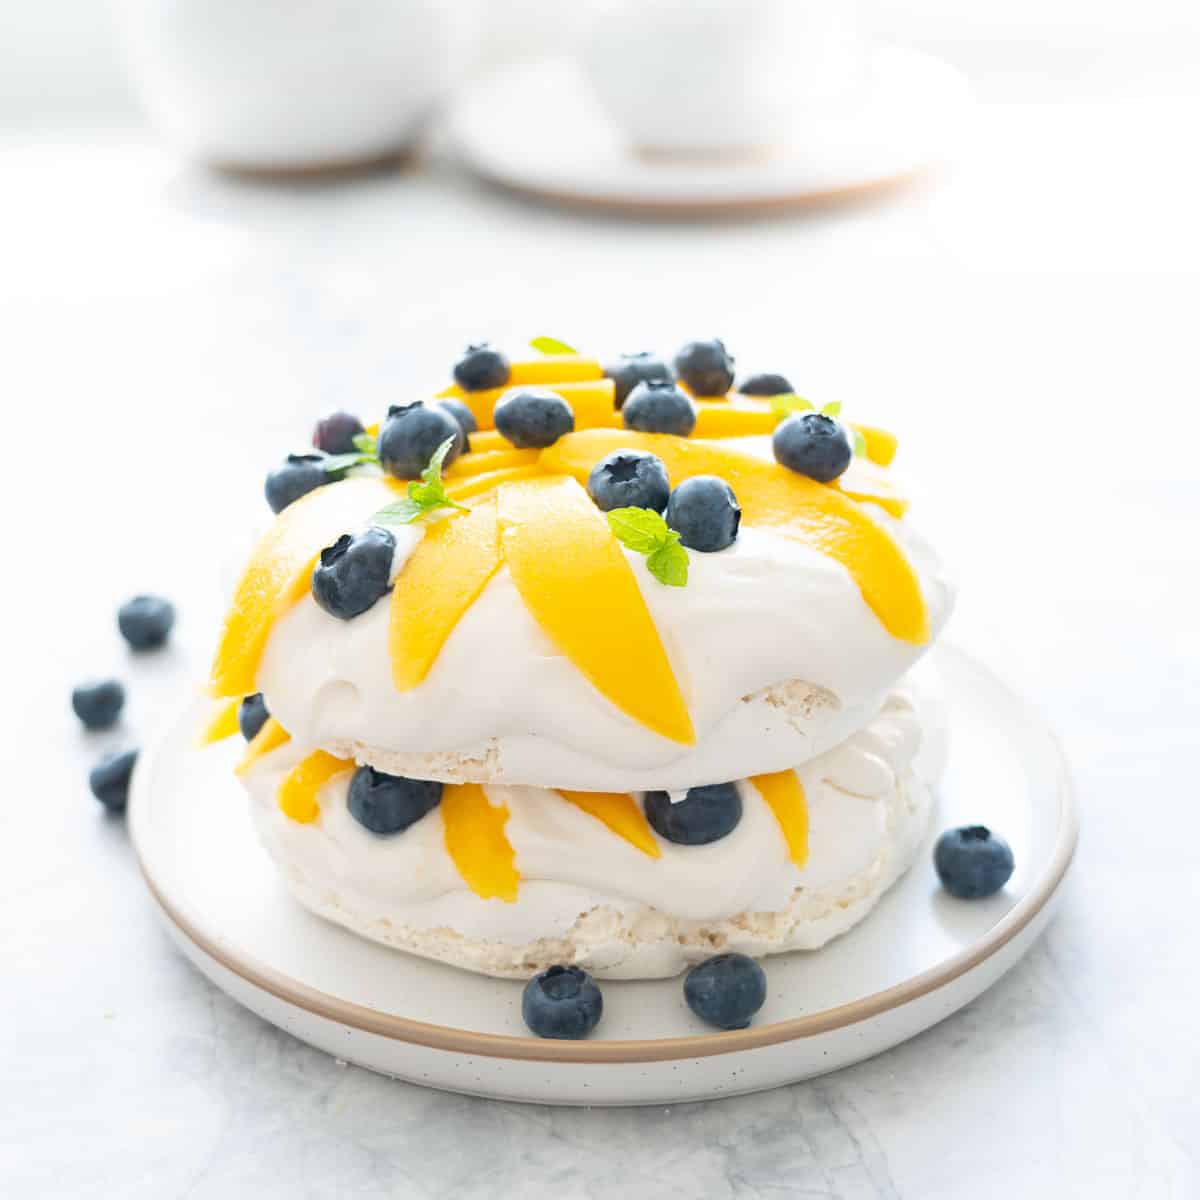 A two layer pavlova topped and filled with whipped cream, sliced mango, blueberries and mint leaves on a white plate scattered with blueberries.